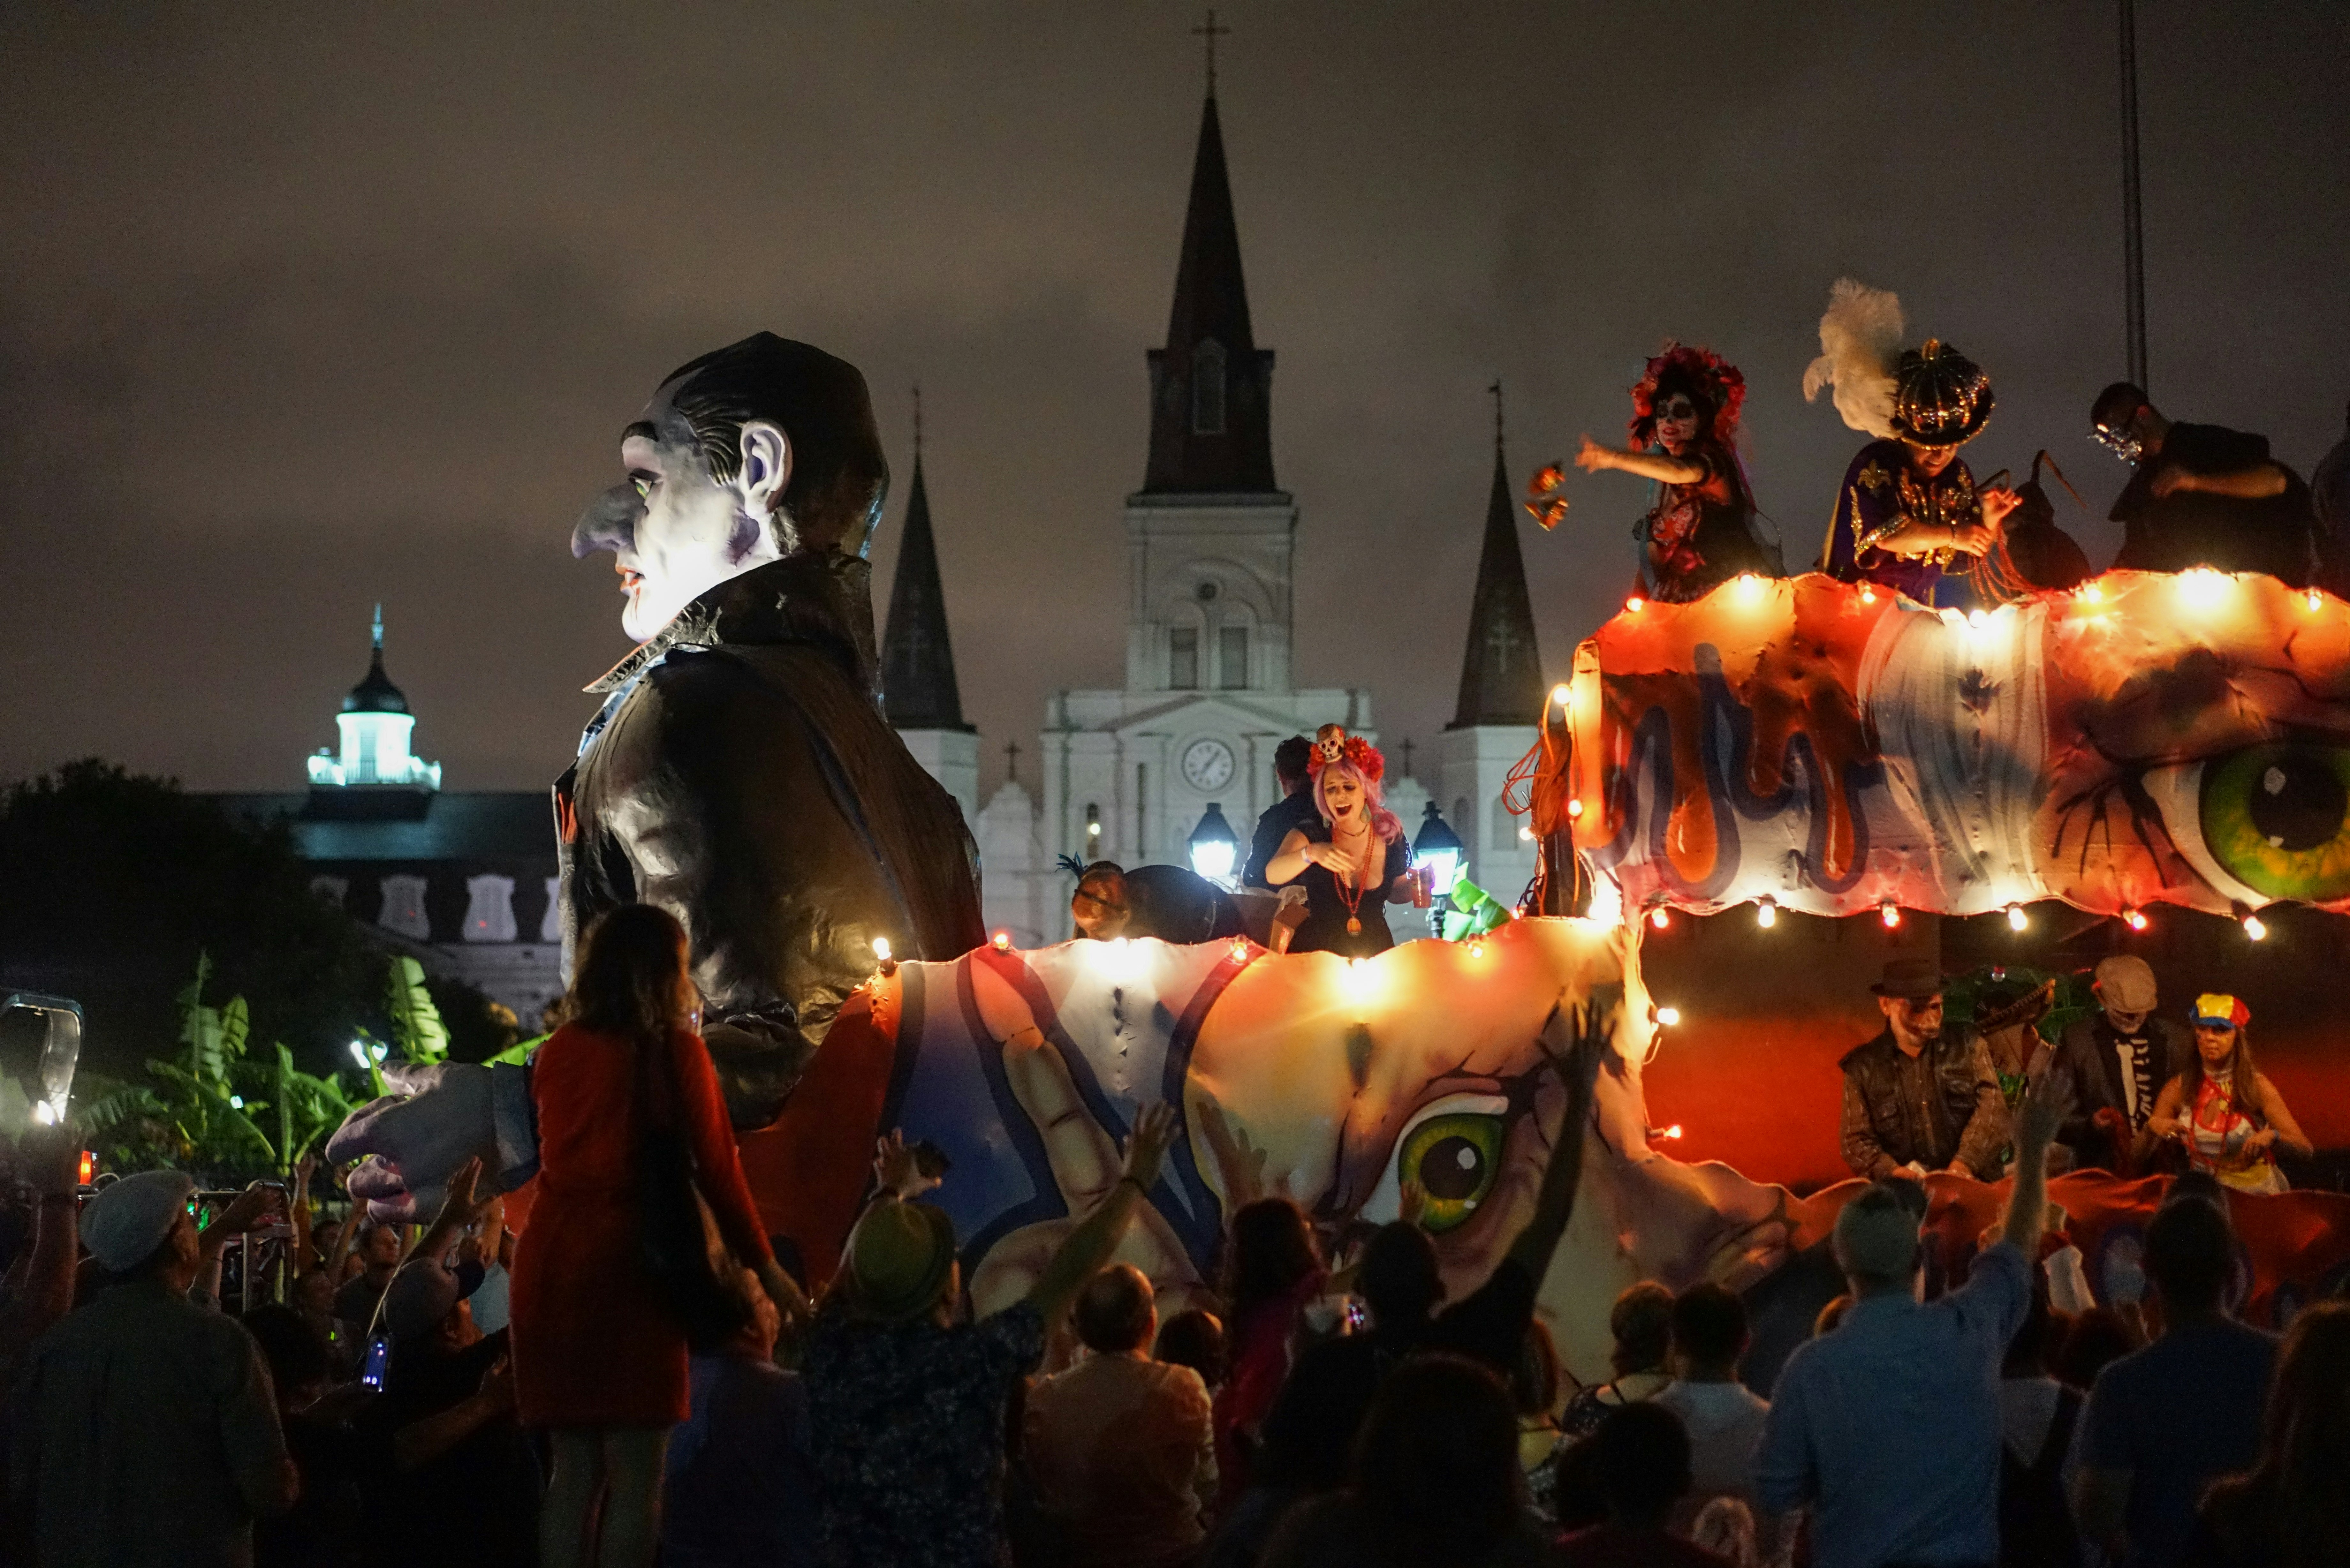 A large float with a huge Dracula figure at the front is illuminated by a strong of light bulbs. People dressed in elaborate costumes throw items off the float to people on the street. 